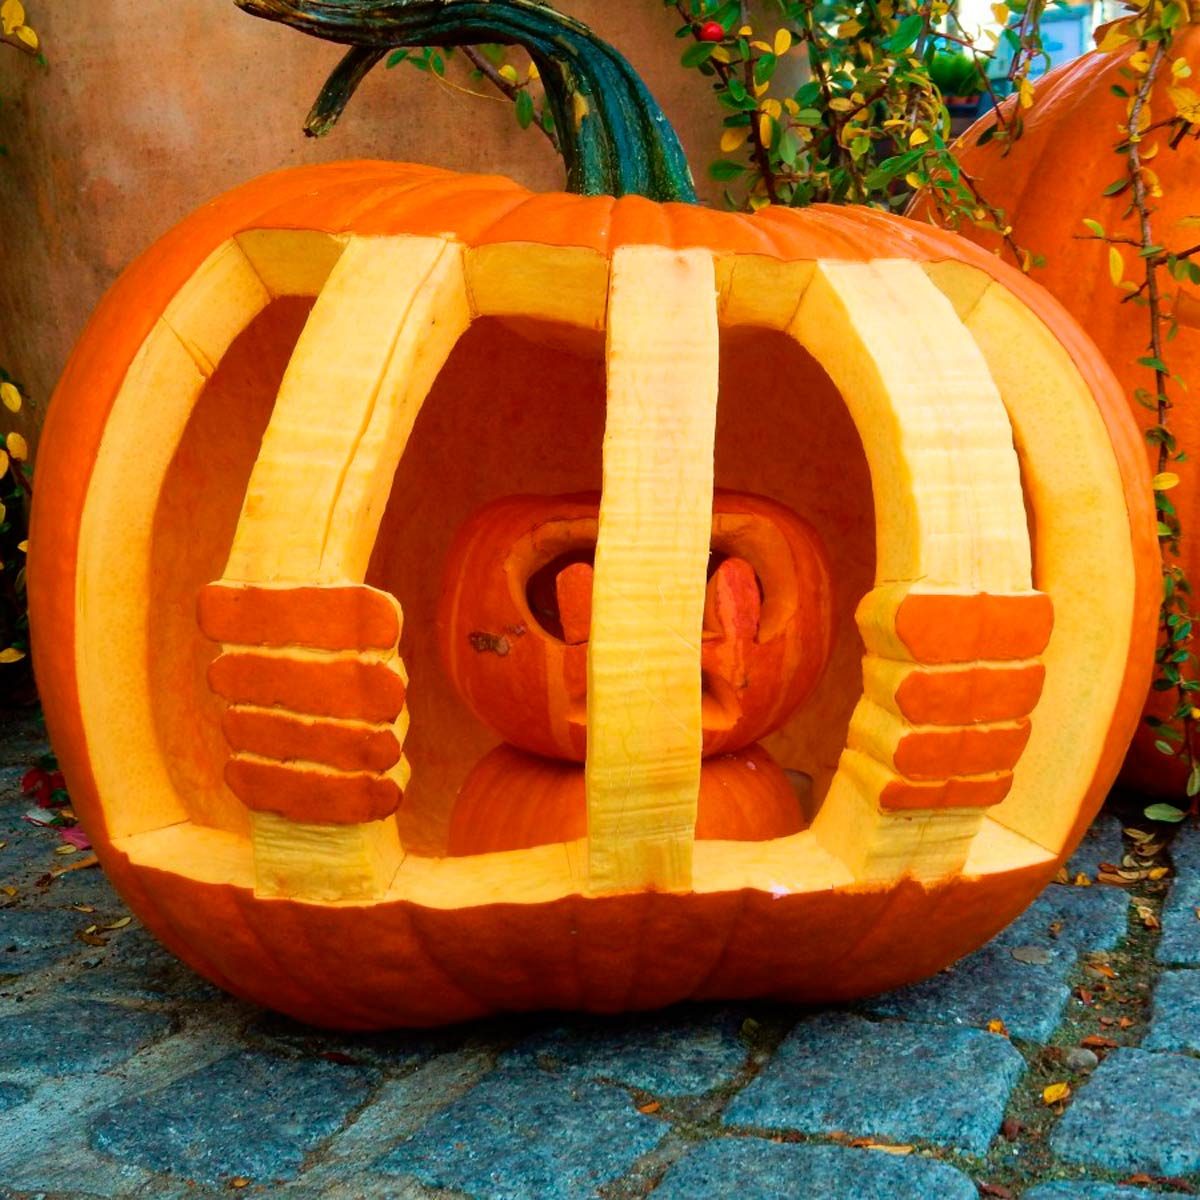 20 Pumpkin Carving Ideas to Inspire You this Halloween | Reader's Digest